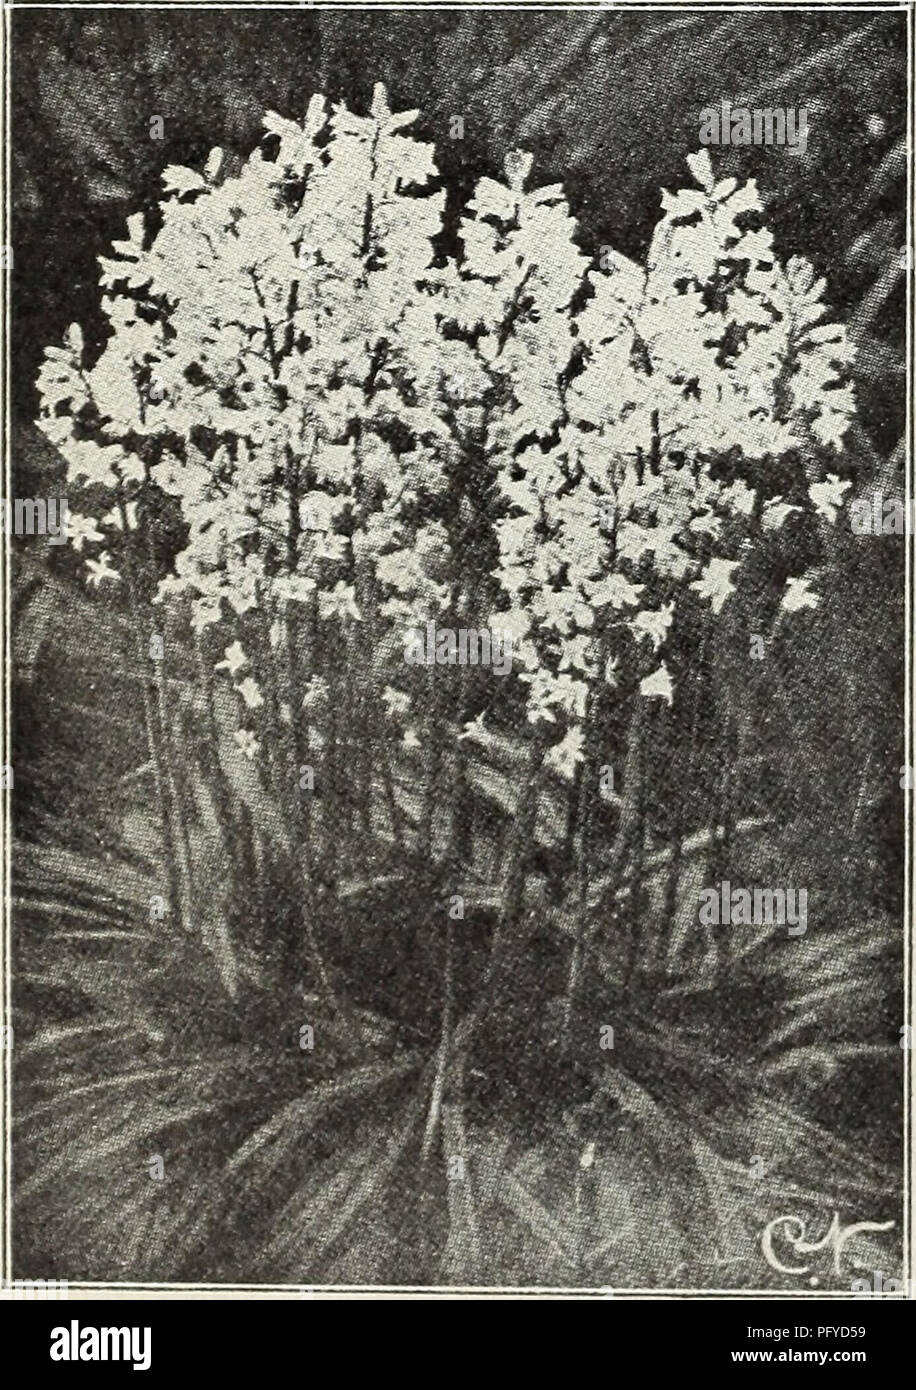 . Currie's autumn 1929 54th year bulbs and plants. Flowers Seeds Catalogs; Bulbs (Plants) Seeds Catalogs; Nurseries (Horticulture) Catalogs; Plants, Ornamental Catalogs. Grape Hyacinths GRAPE HYACINTHS (Hyacinthus muscari) Forms small spikes of flowers resembling a bunch of grapes. Perfectly hardy. Botryoldes Blue—Doz., 50c; 100, ^3.00. Botryoides White—^Doz., 80c; 100, ^6,00. Heavenly Blue—The best and largest of the Grape Hyacinths. Good for pot culture as well as out'doors. Doz., 60c; 100, ^4.00. ORNITHOGALUM (Star of Bethlehem) Umbellatum—Pretty white star shaped flowers, inside striped gr Stock Photo